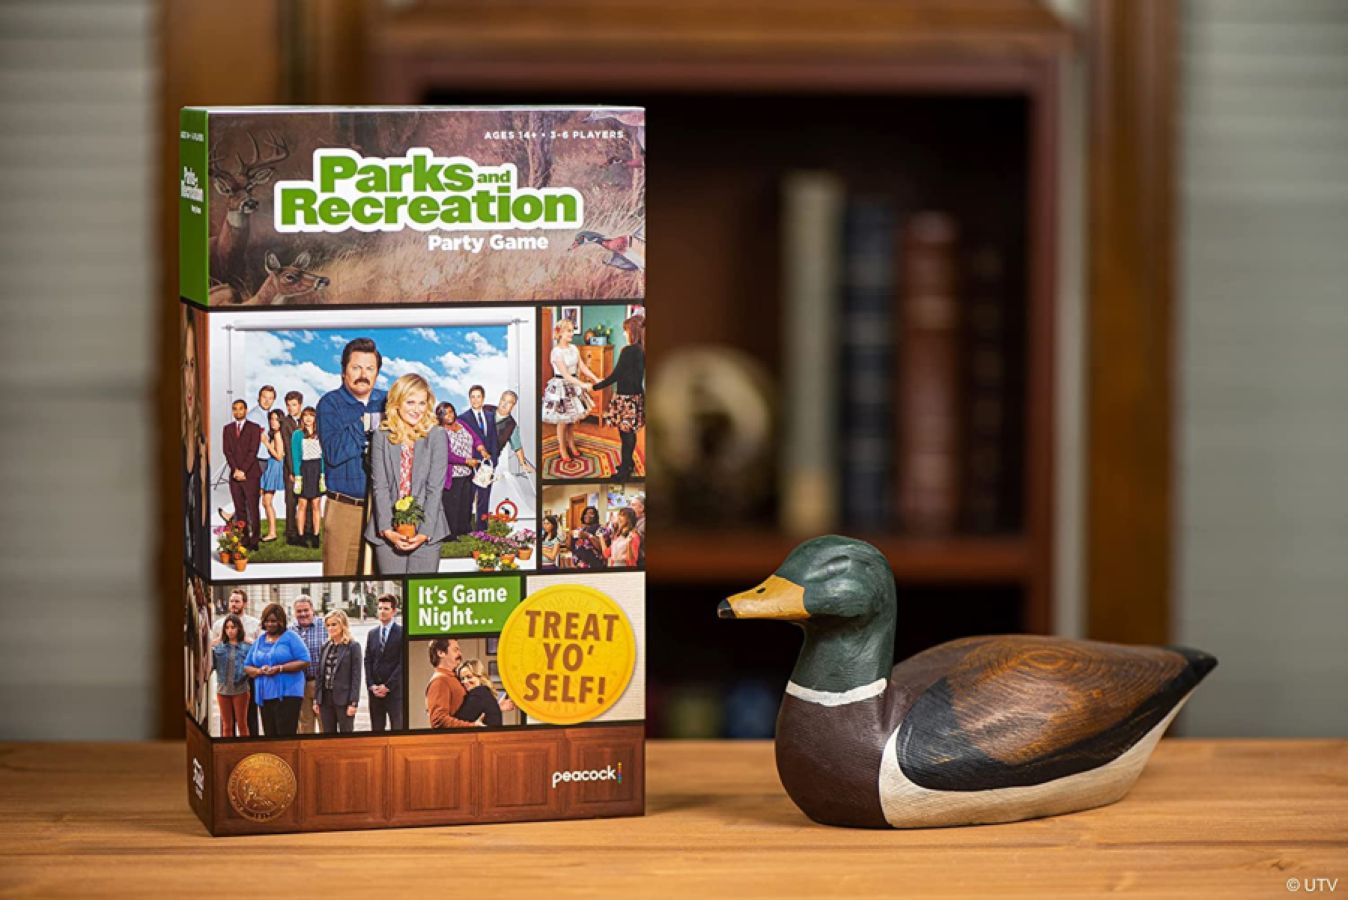 Parks and Recreation - Party Game